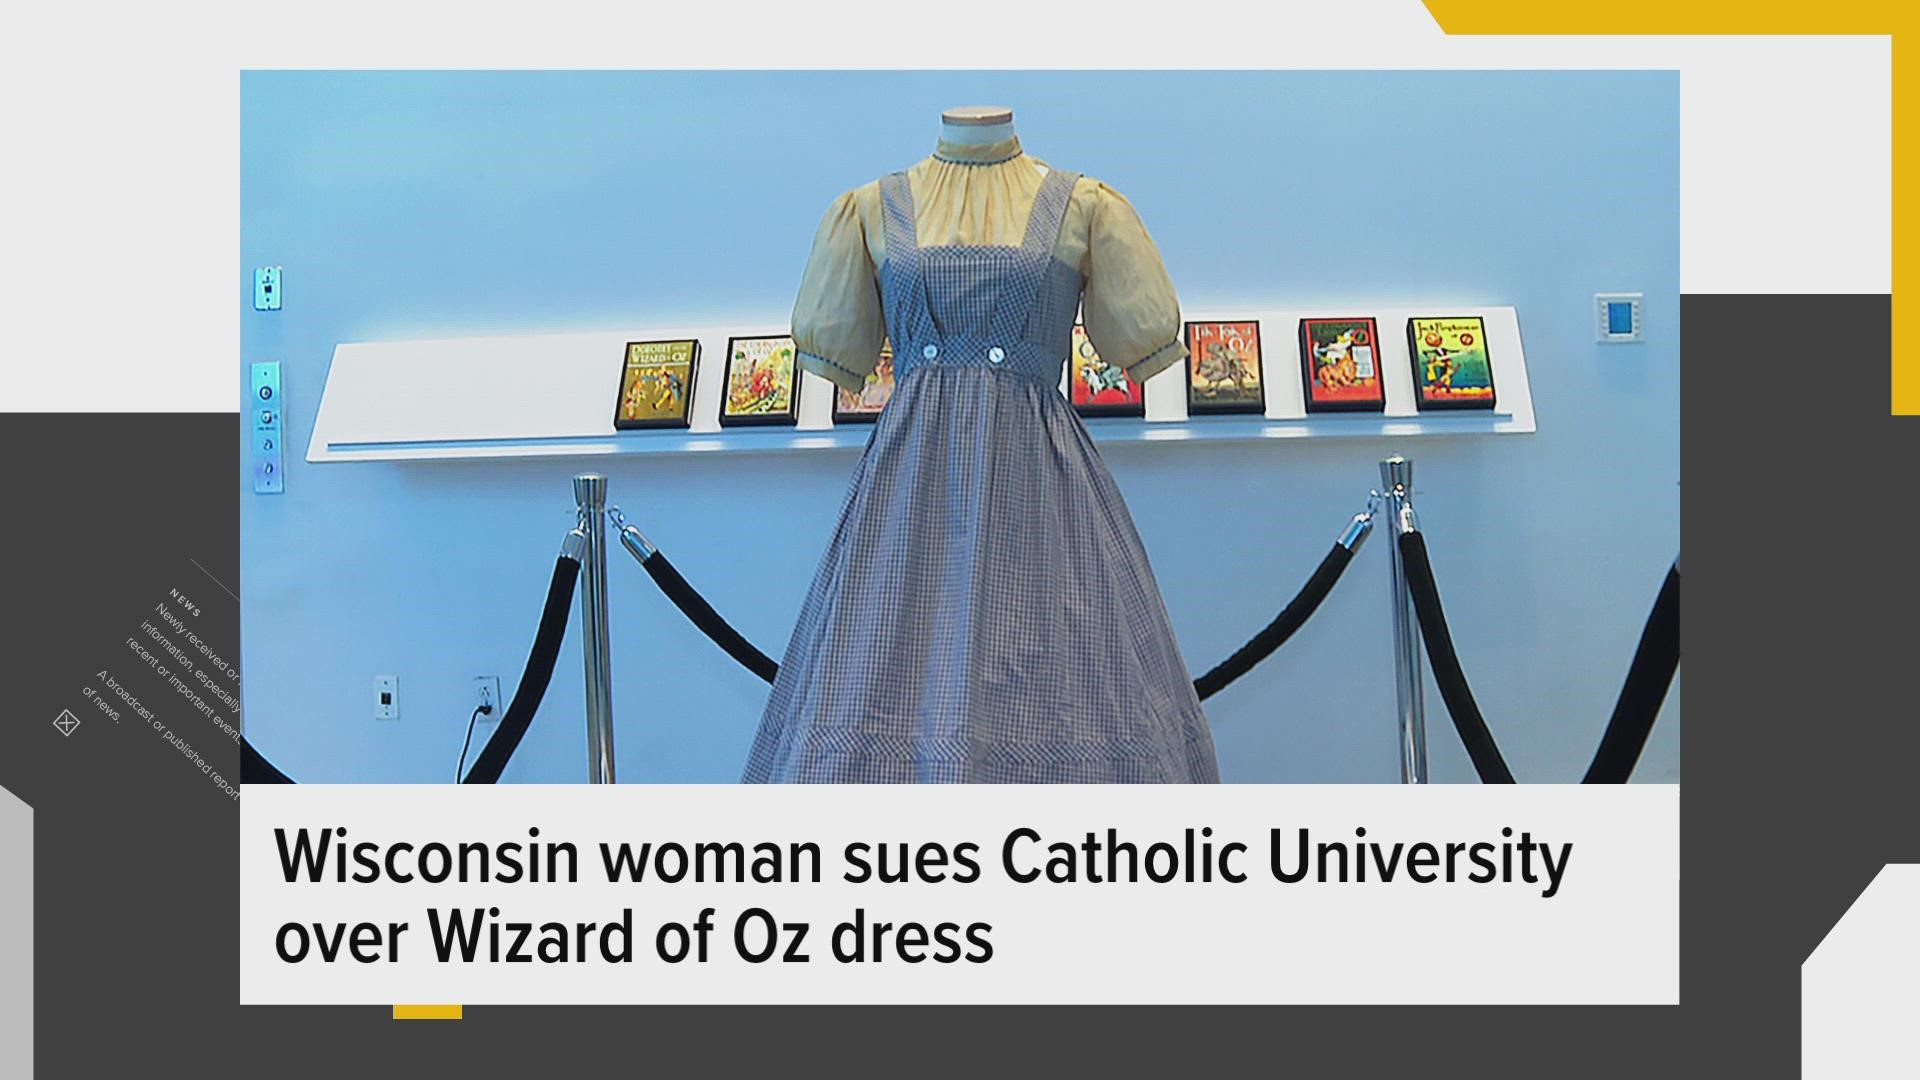 The Catholic University of America is planning to auction off a dress worn by Judy Garland in the Wizard of Oz but a woman is claiming it's hers. It was found at CUA